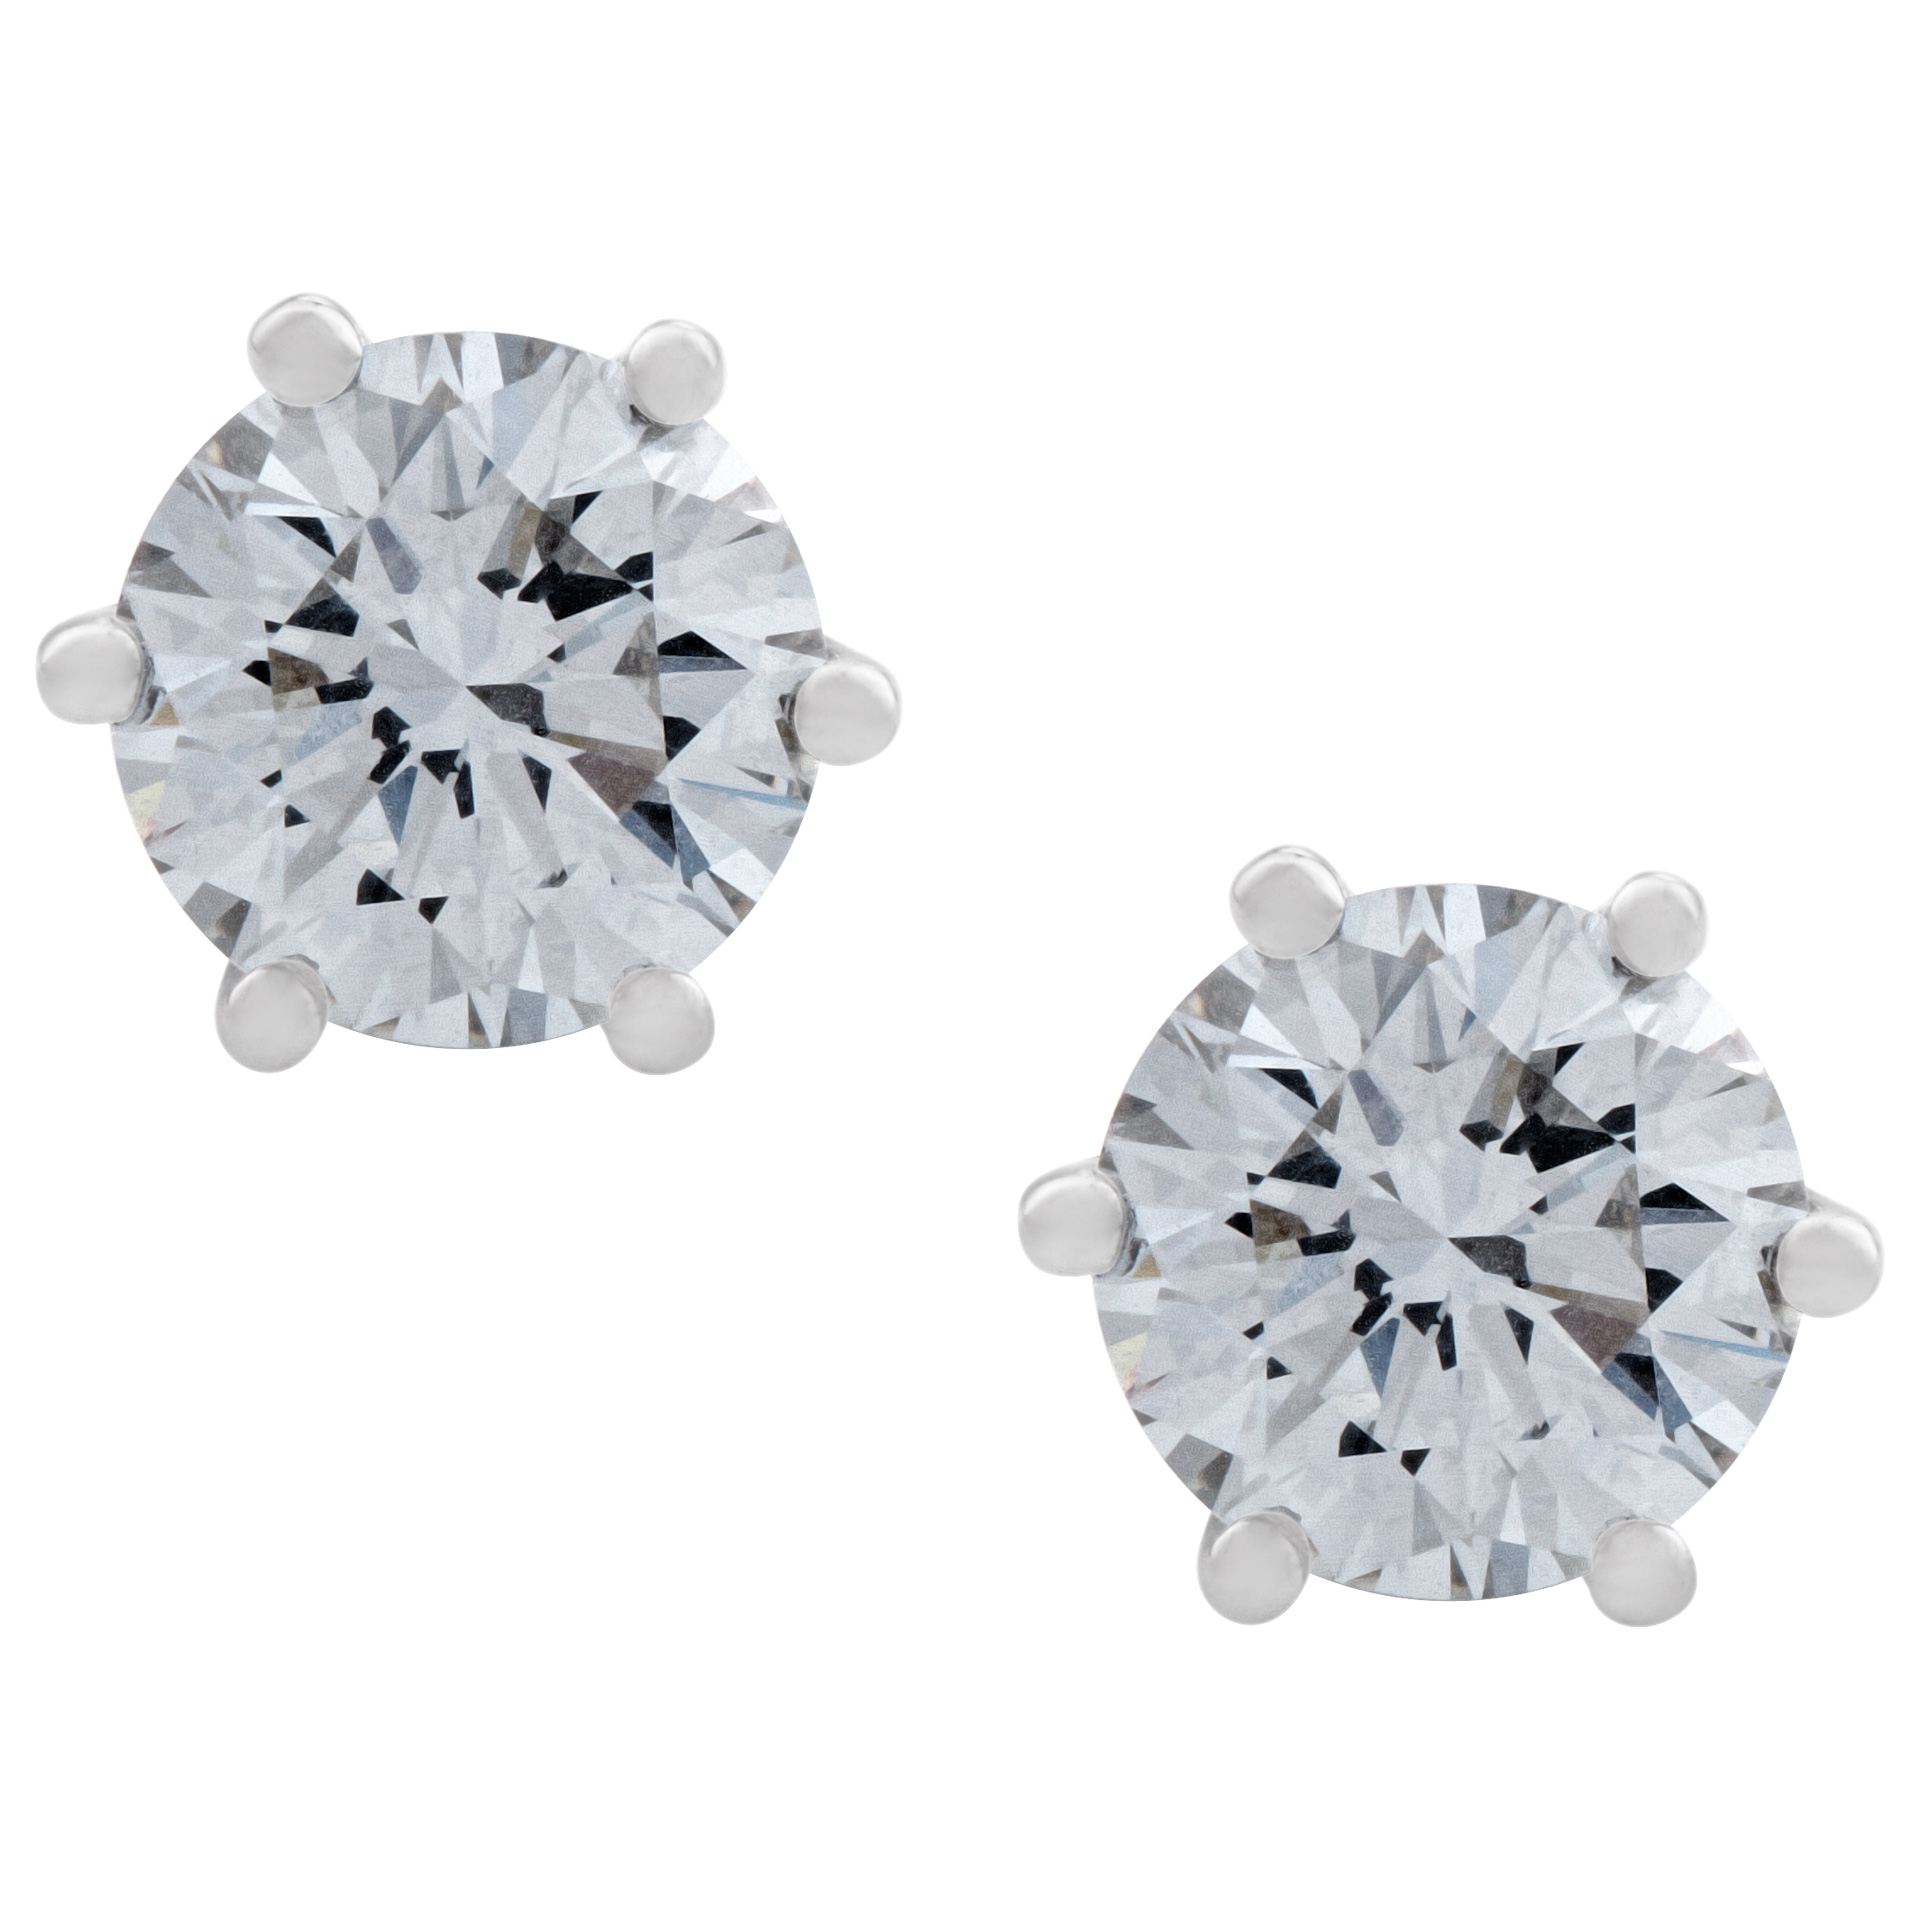 GIA Certified Diamond stud earrings in 18k white gold. 1.01 and 1.03 cts G color, VS2 clarity image 1